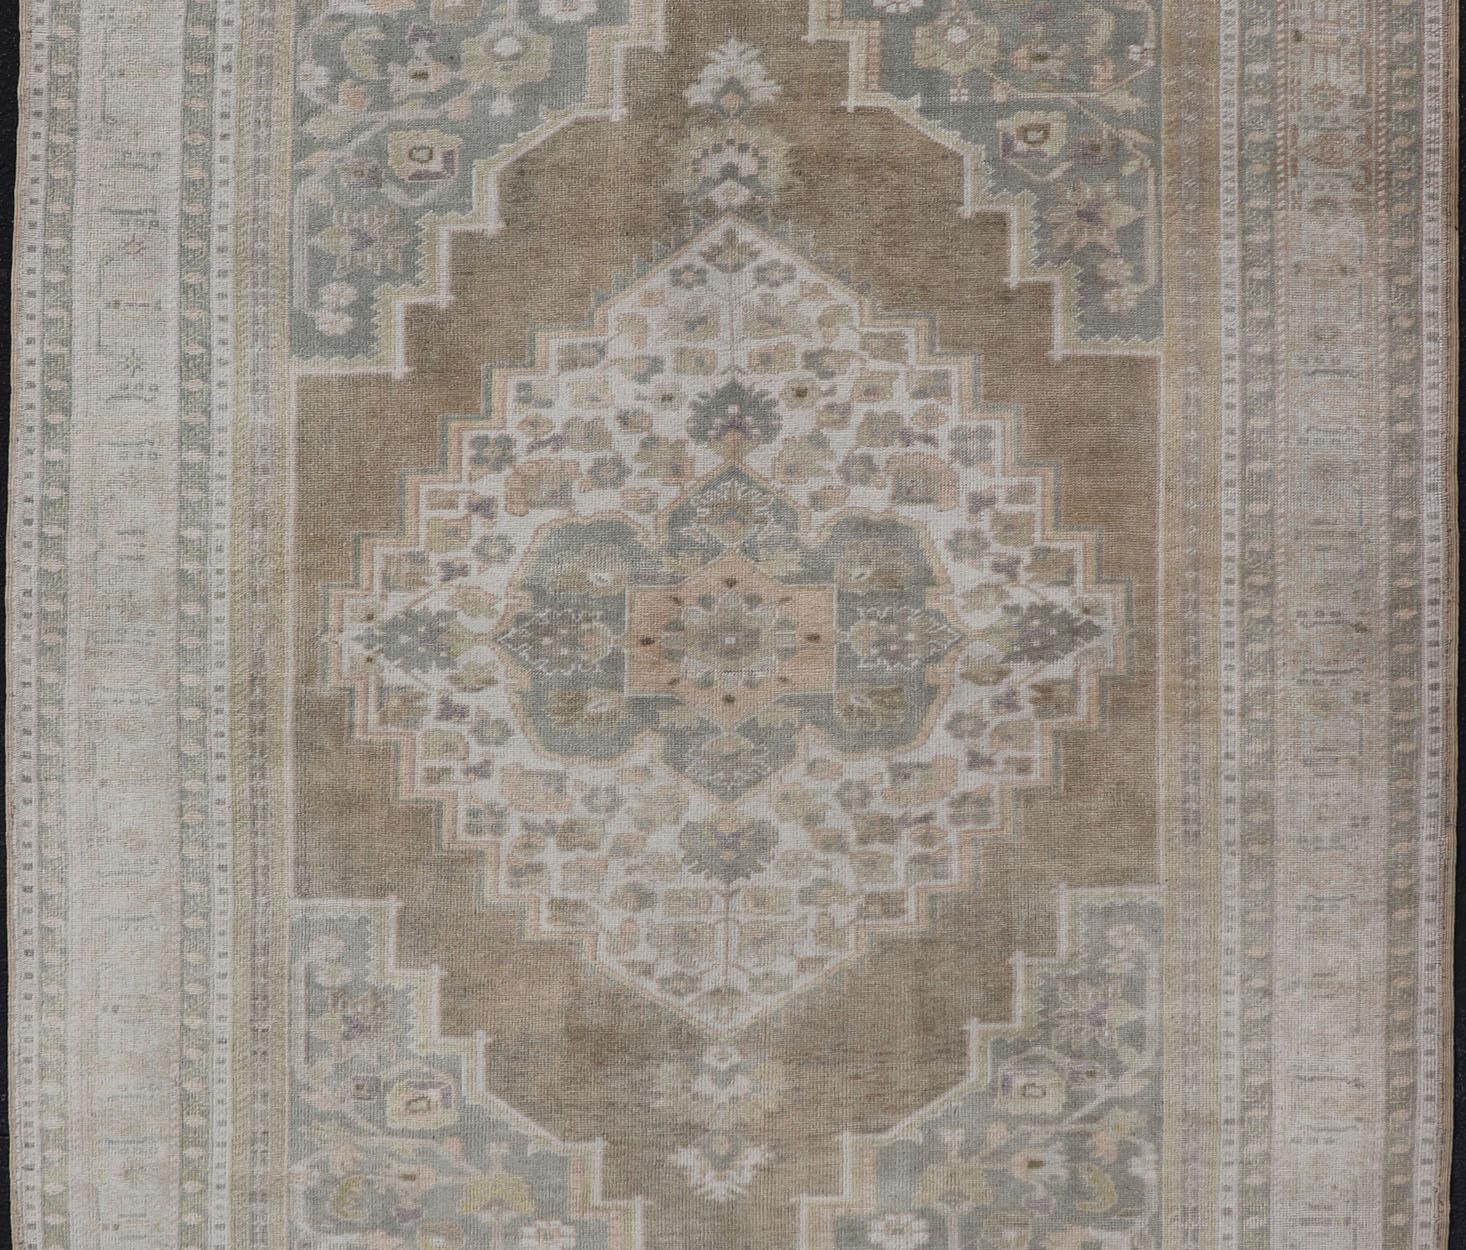 Hand-Knotted Vintage Oushak Rug from Turkey with Muted Colors and Floral Medallion For Sale